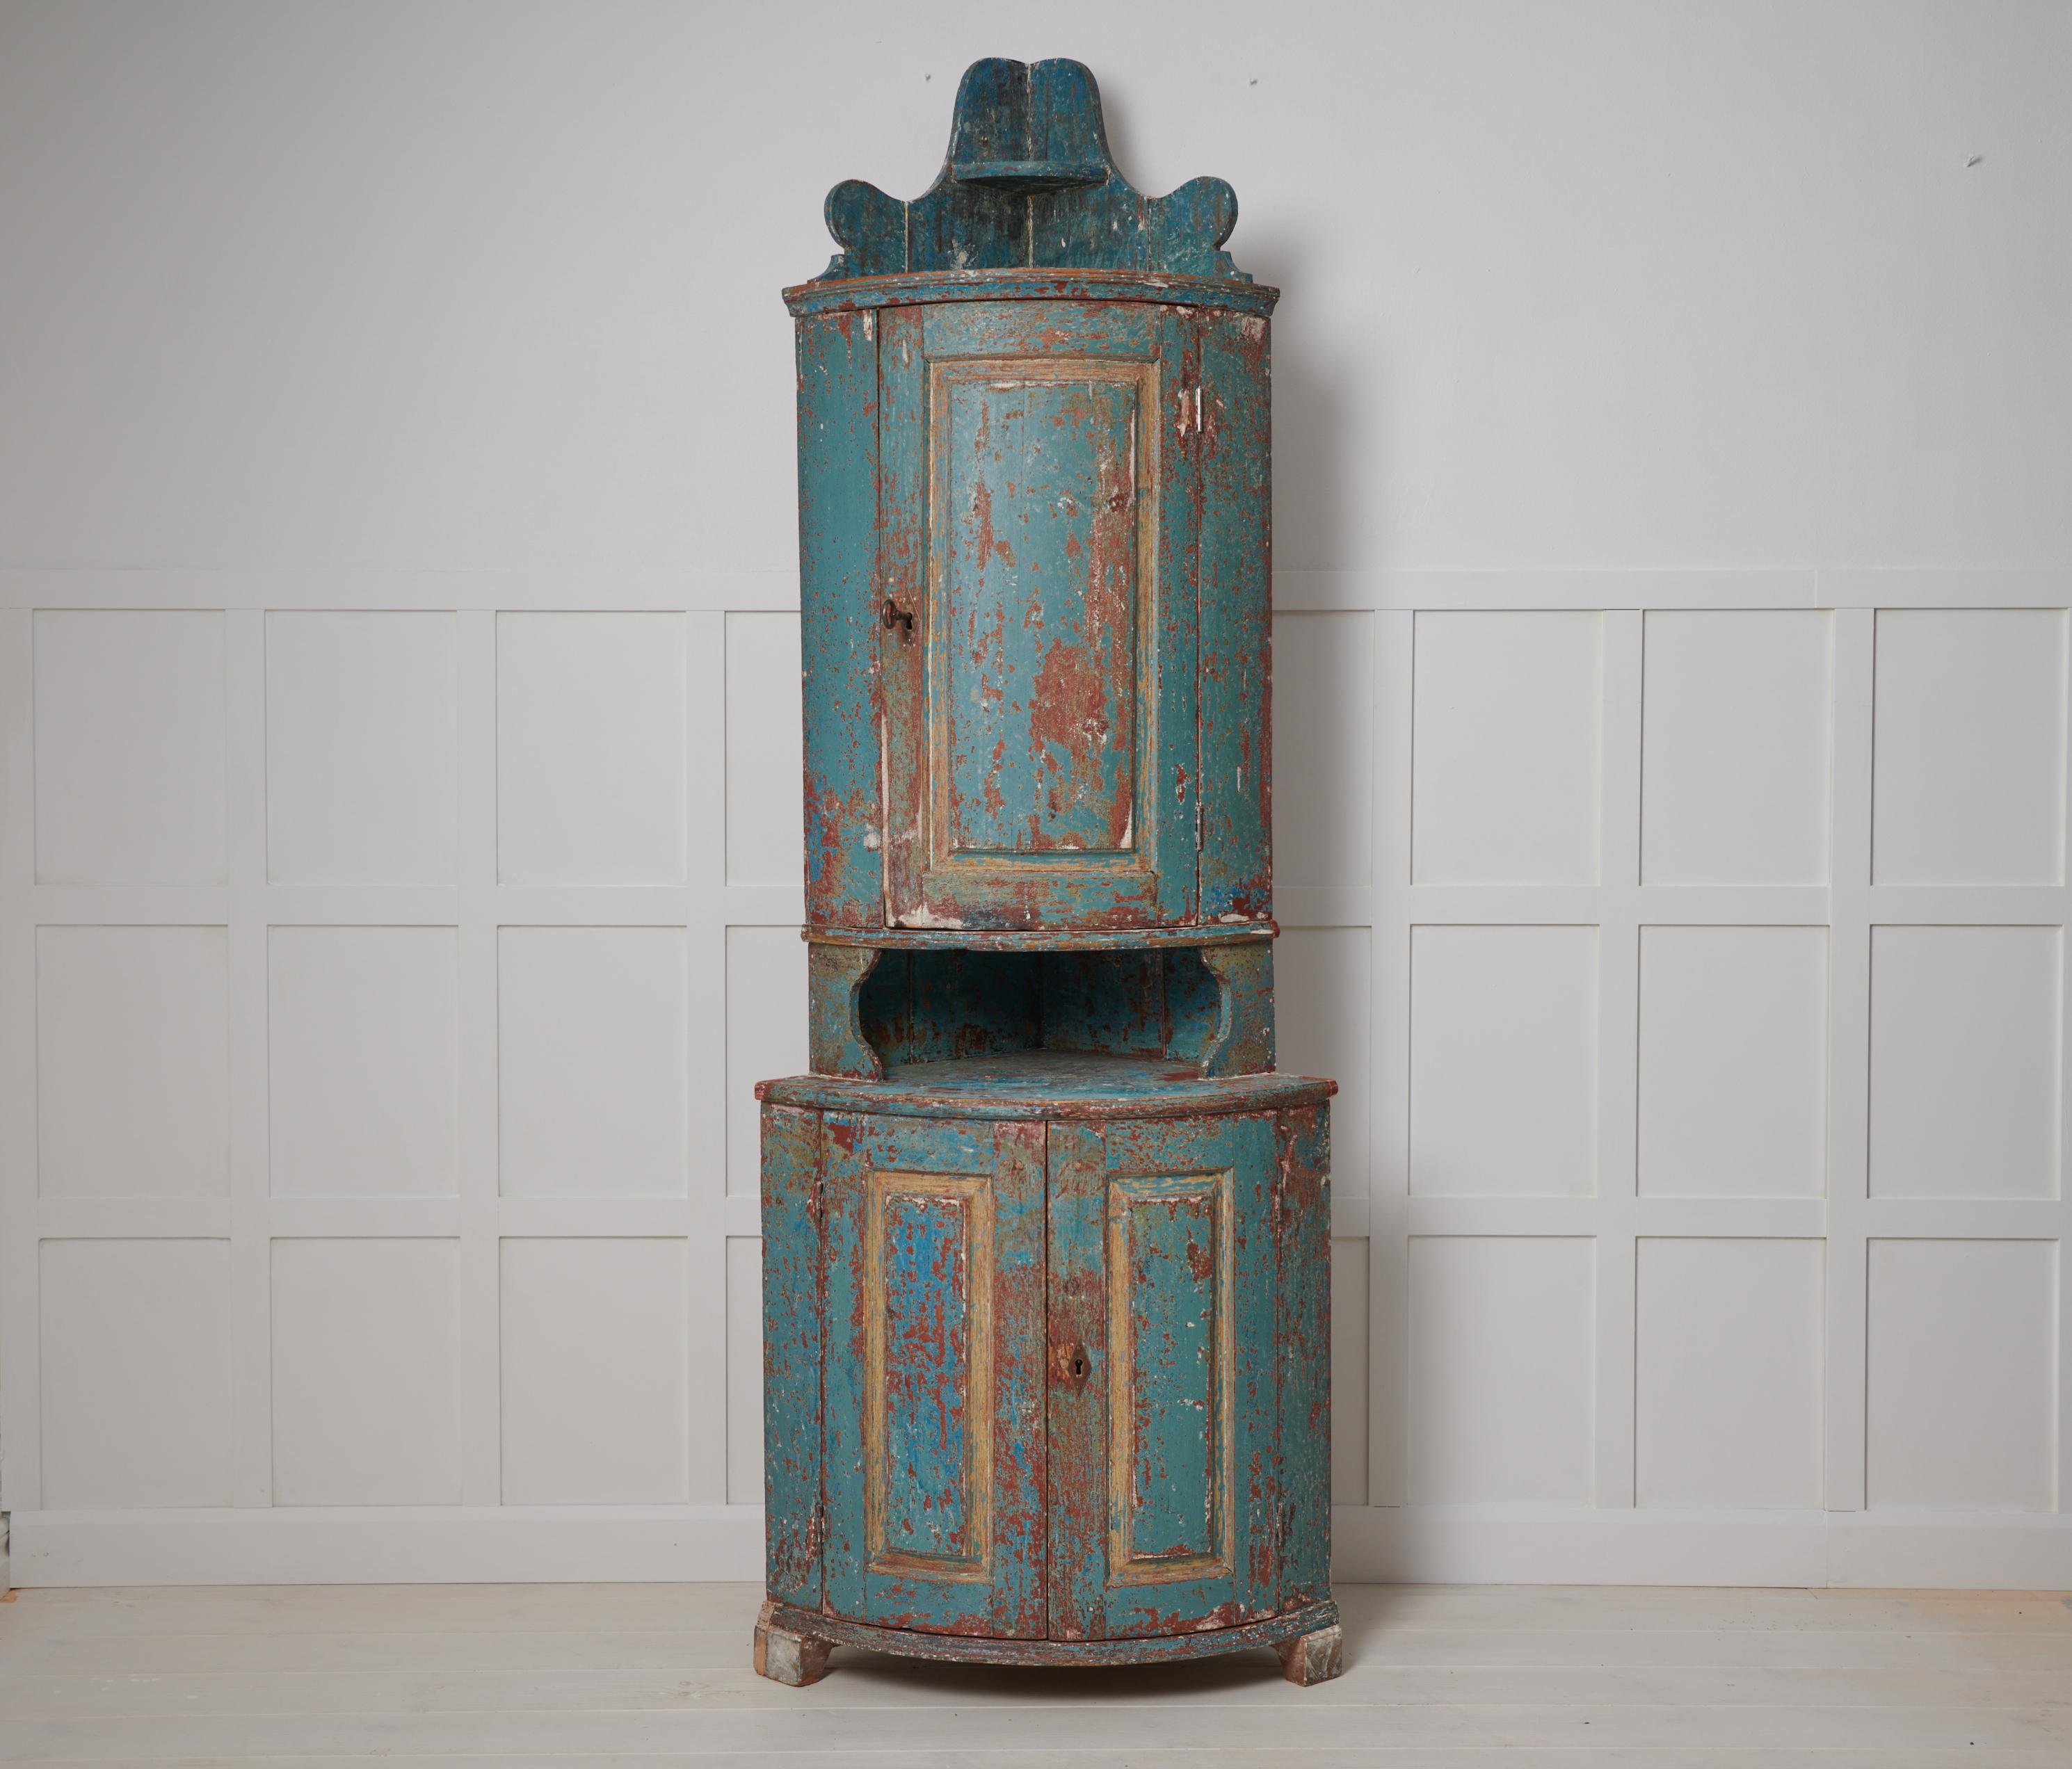 Antique Swedish corner cabinet. The cabinet is a genuine Swedish country house furniture from the early 1800s. Old historic paint with a rustic surface and genuine patina and character. The cabinet has working locks and keys. The sides of the lower